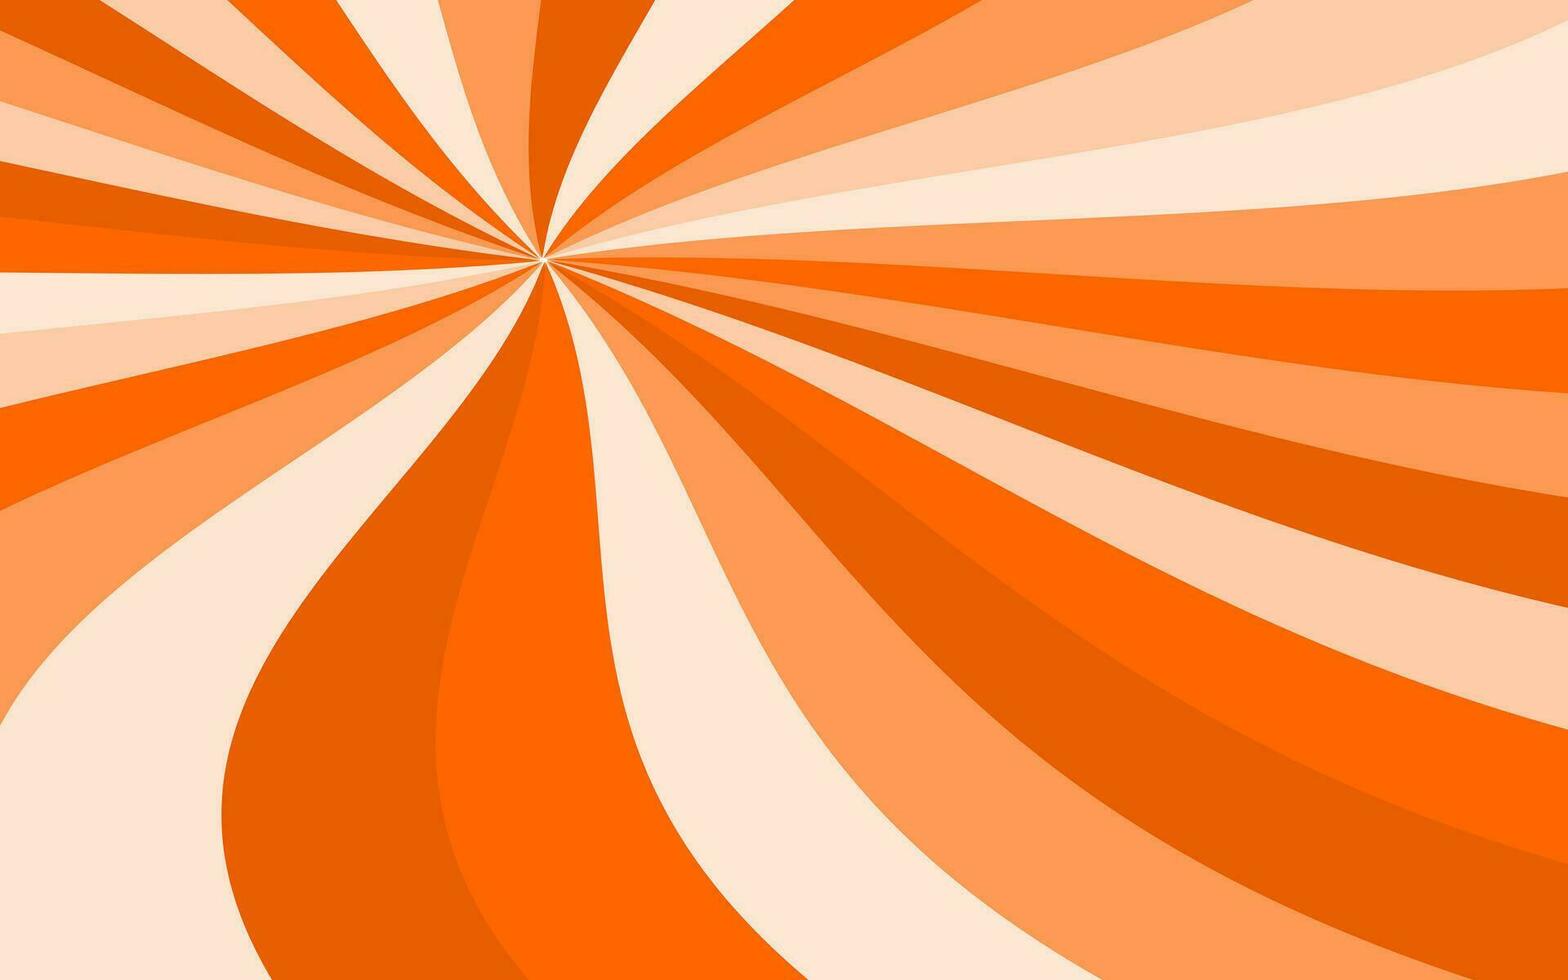 Abstract orange color sun rays background. Summer, Halloween, fall, harvest, pumpkin, thanksgiving concepts. vector